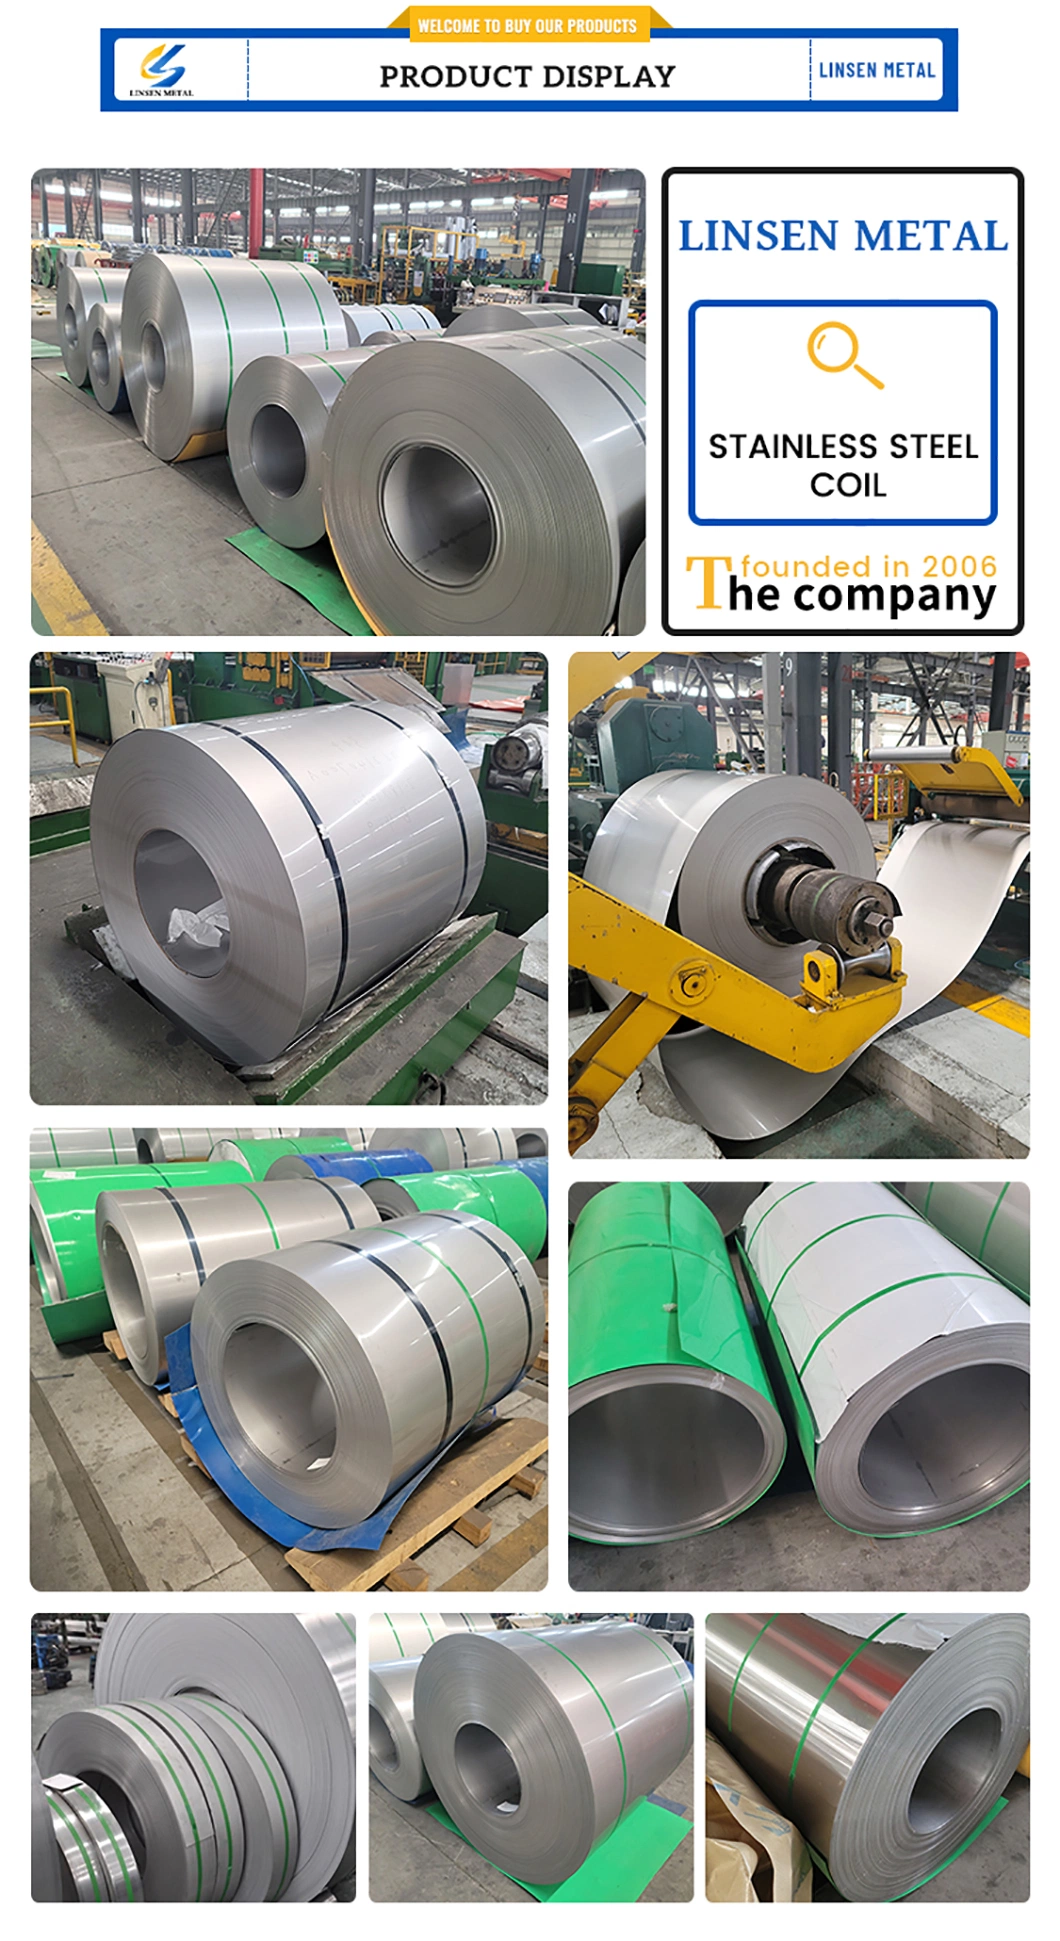 ASTM/JIS/SUS Factory Direct 201 304 316 316L 321 420 420j2 430 2205 2507 904L Grade 2b Ba No.1 No.4 Hl Mirror Cold Rolled Stainless Steel Coil with Certificates